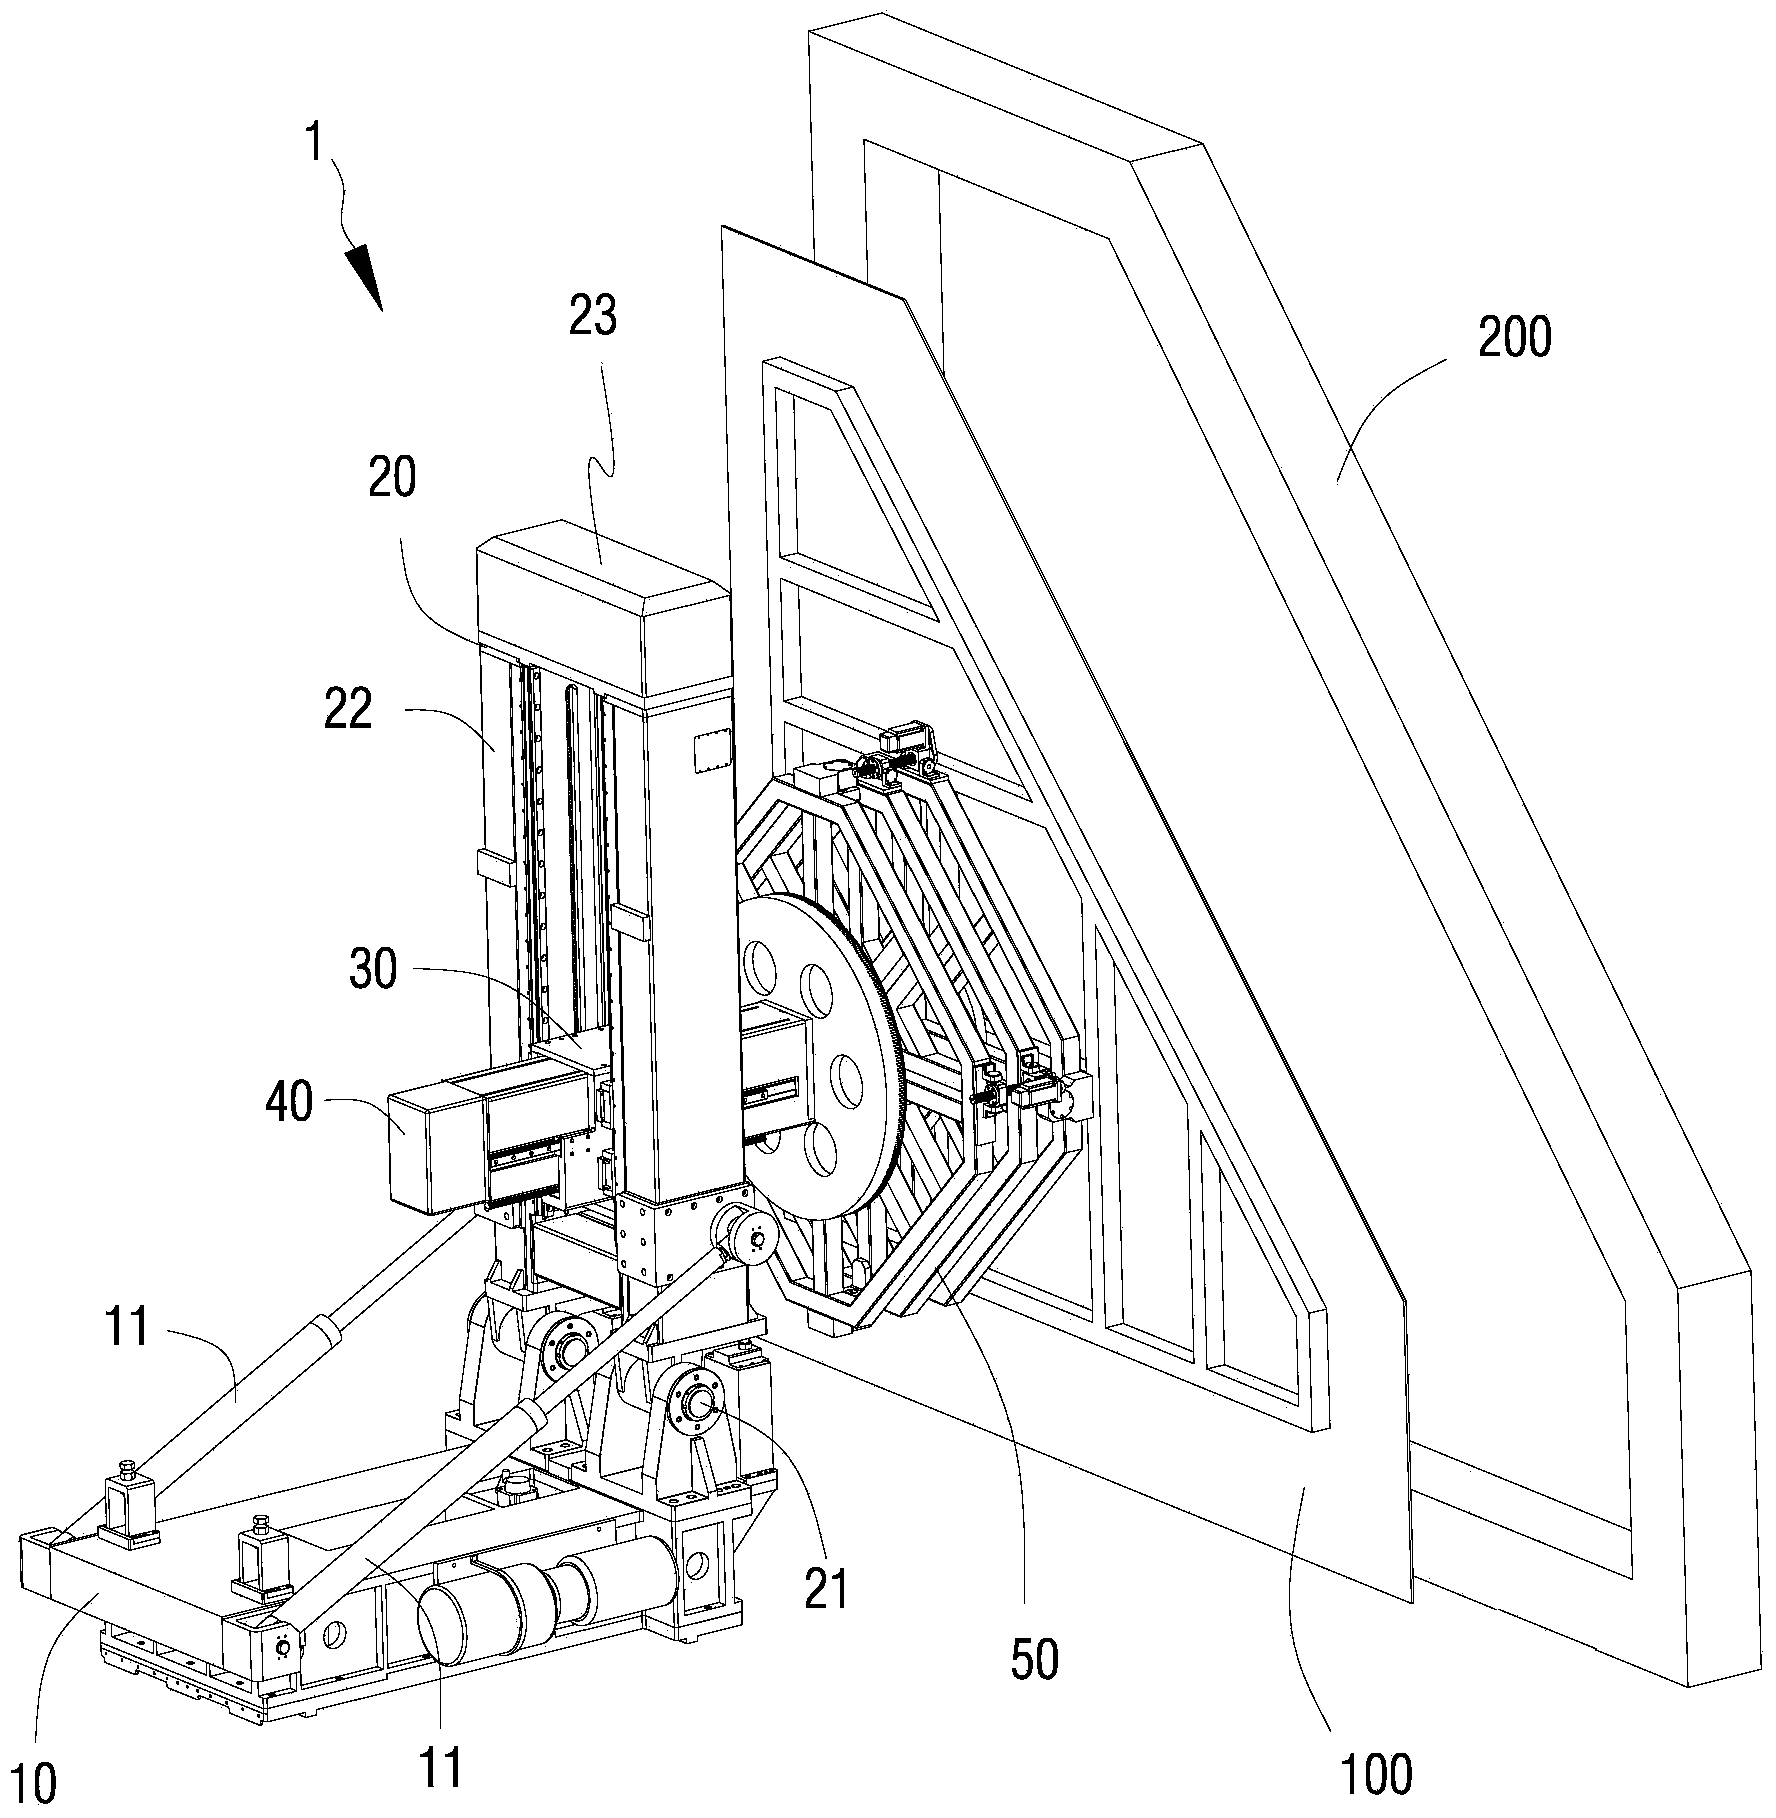 Device for enabling wall plates of wings to be automatically assembled onto and disassembled from frame